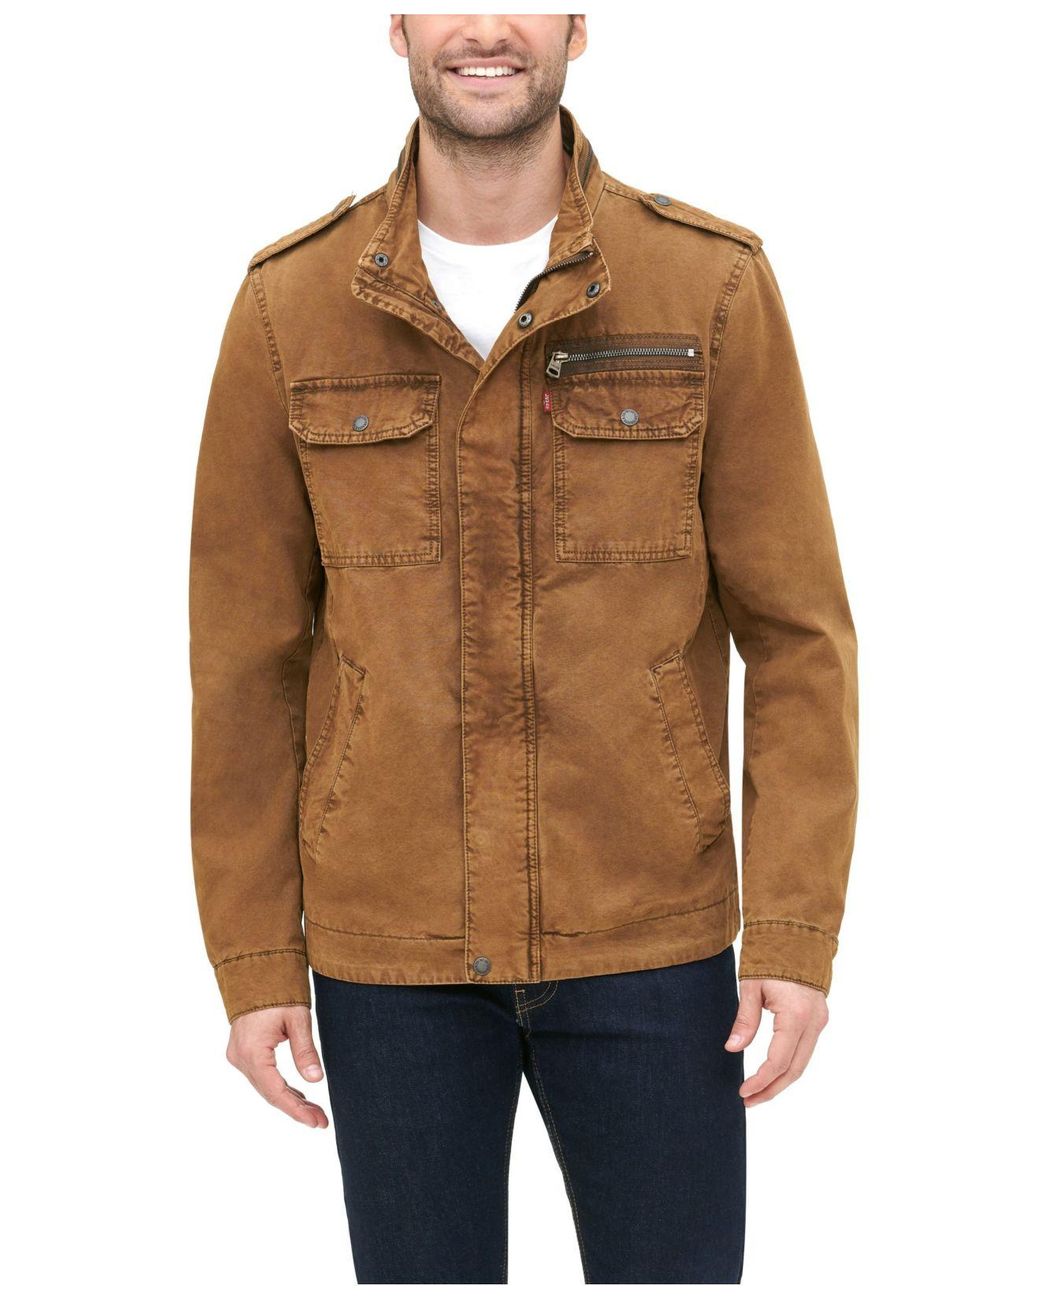 Levi's Cotton Field Jacket in Brown for Men - Lyst